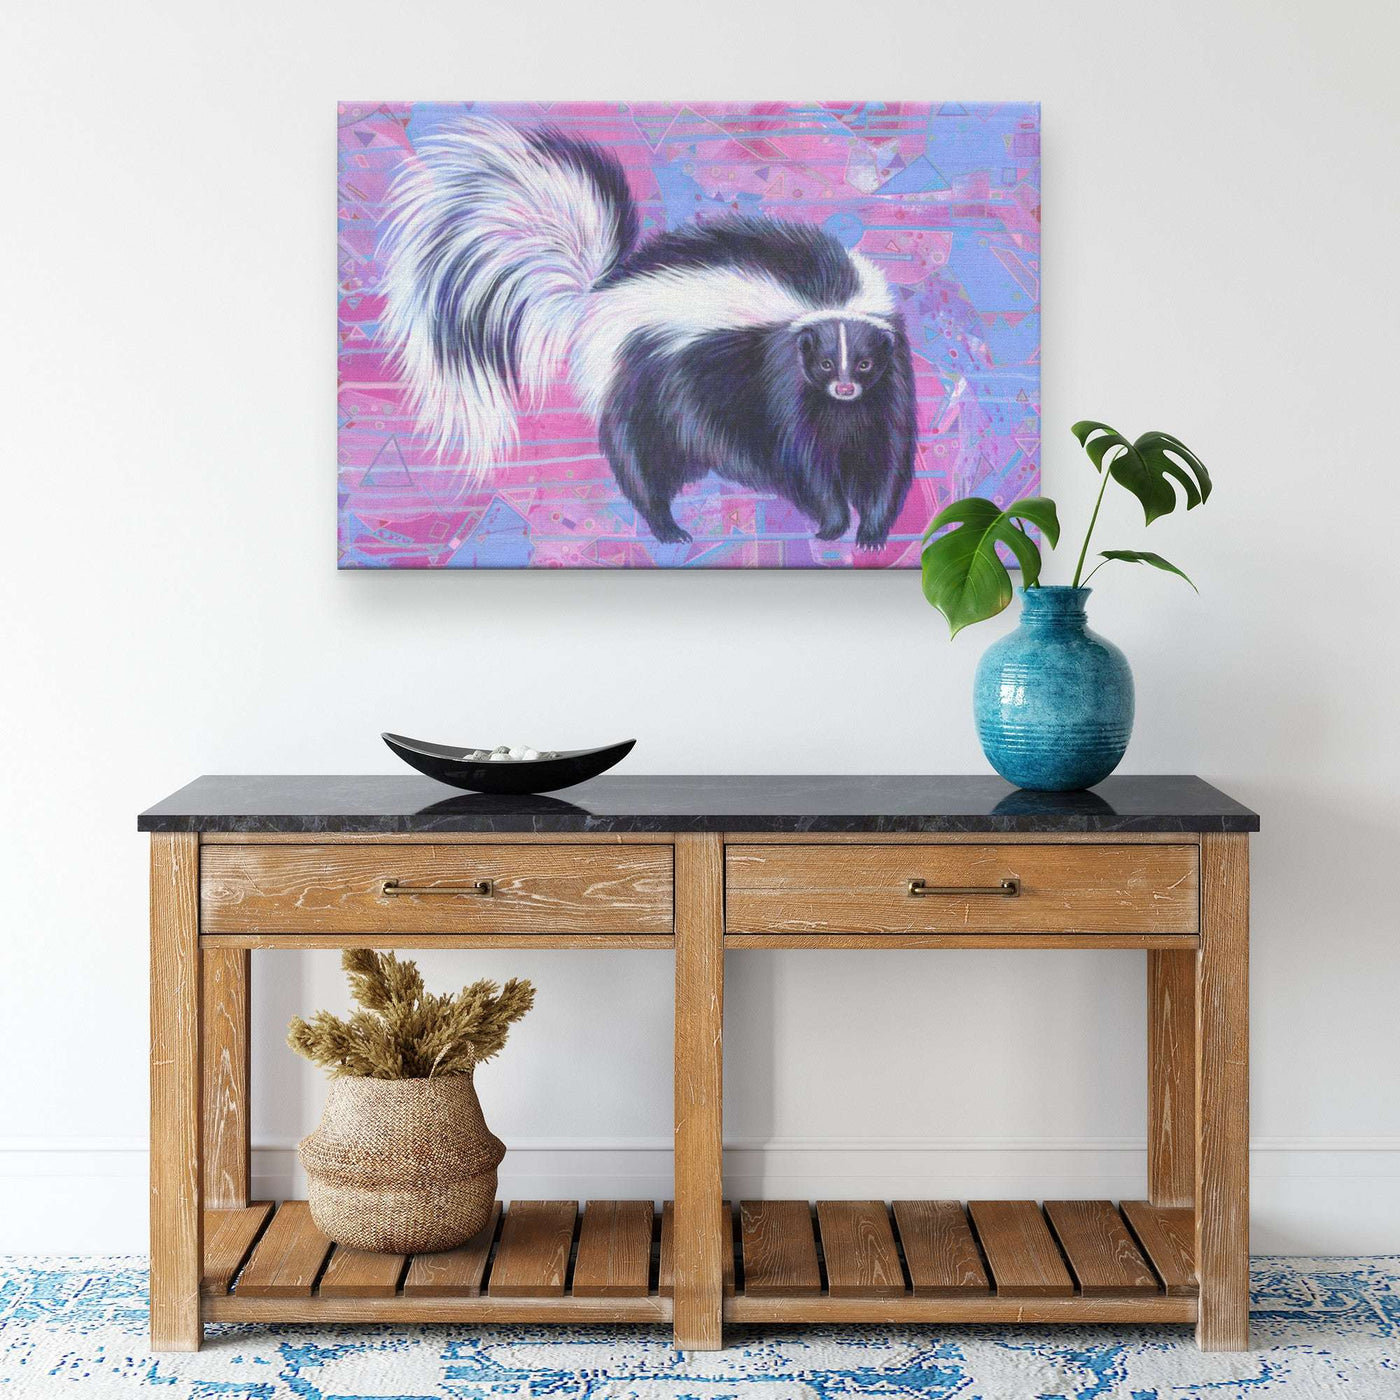 A Canvas Skunk Art Print of a skunk on a pink and blue background hangs above a wooden table.